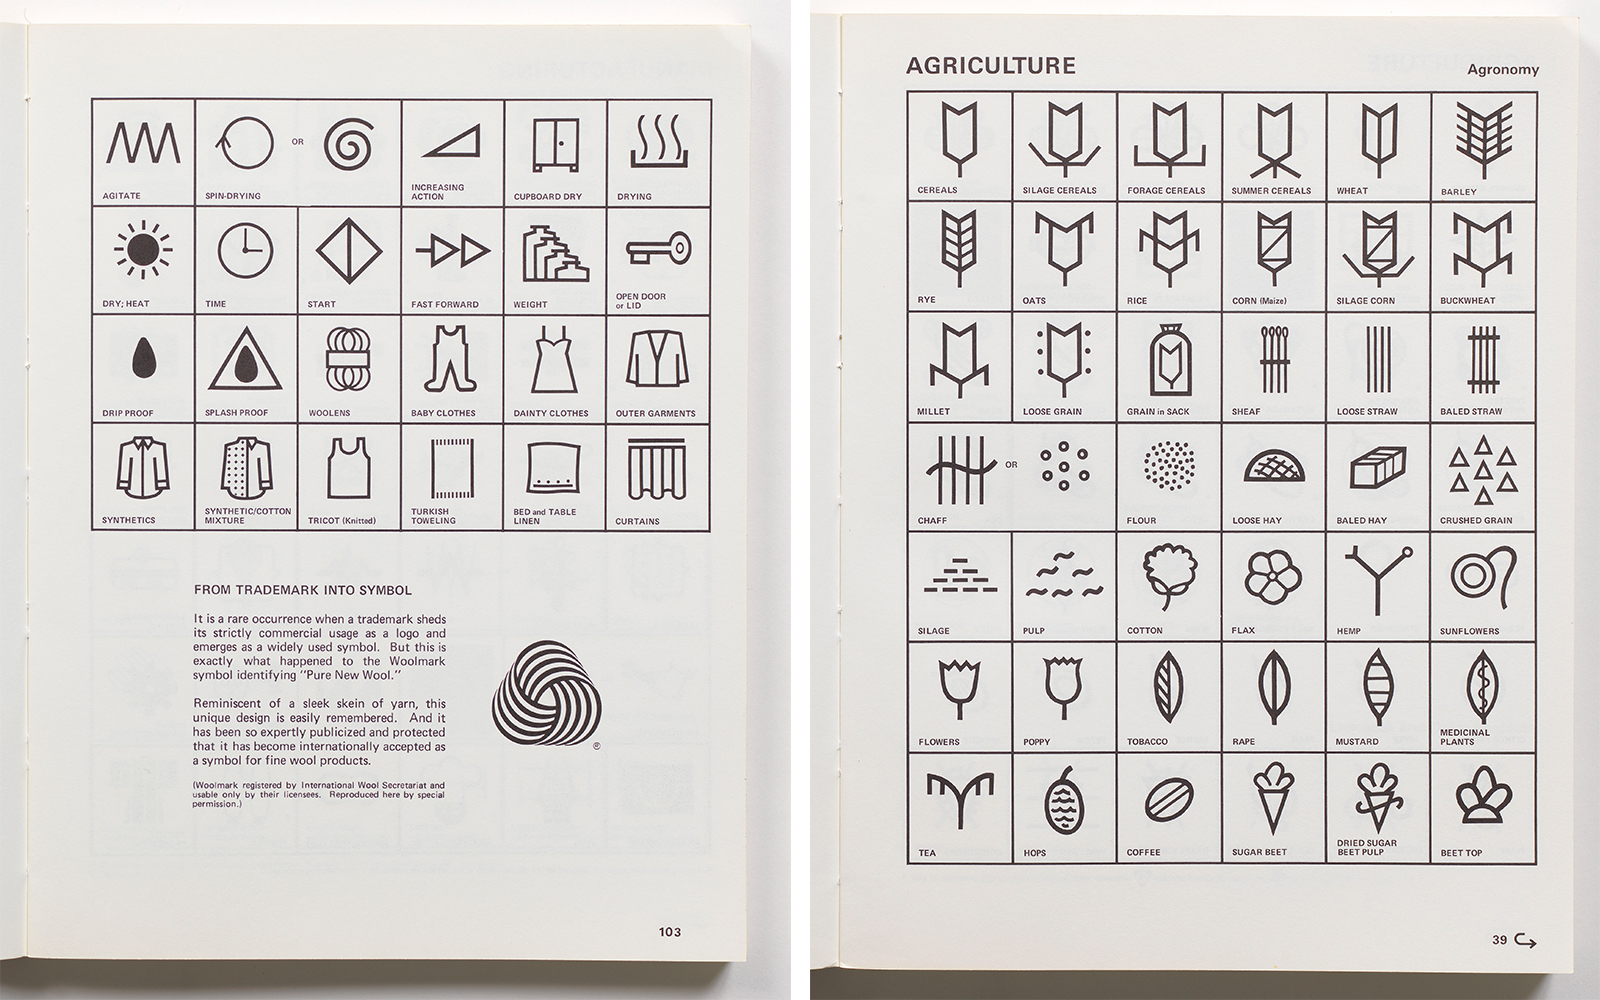 At left: Page from the book the Symbol Sourcebook showing black text and imagery on a white background; on the top half of the page is a gridded arrangement of symbols in four rows including a skein of wool with “WOOLENS” below and on the bottom half of the page is the copyright symbol for Woolmark of a triangular trail of striped black and white wool with explanatory text to the left and the heading “FROM TRADEMARK INTO SYMBOL”. At right: Page from the book the Symbol Sourcebook showing black text and imagery on a white background; “AGRICULTURE” heading at top left with gridded arrangement of symbols of crops including a silhouette of a puffy flower form with “COTTON” below.